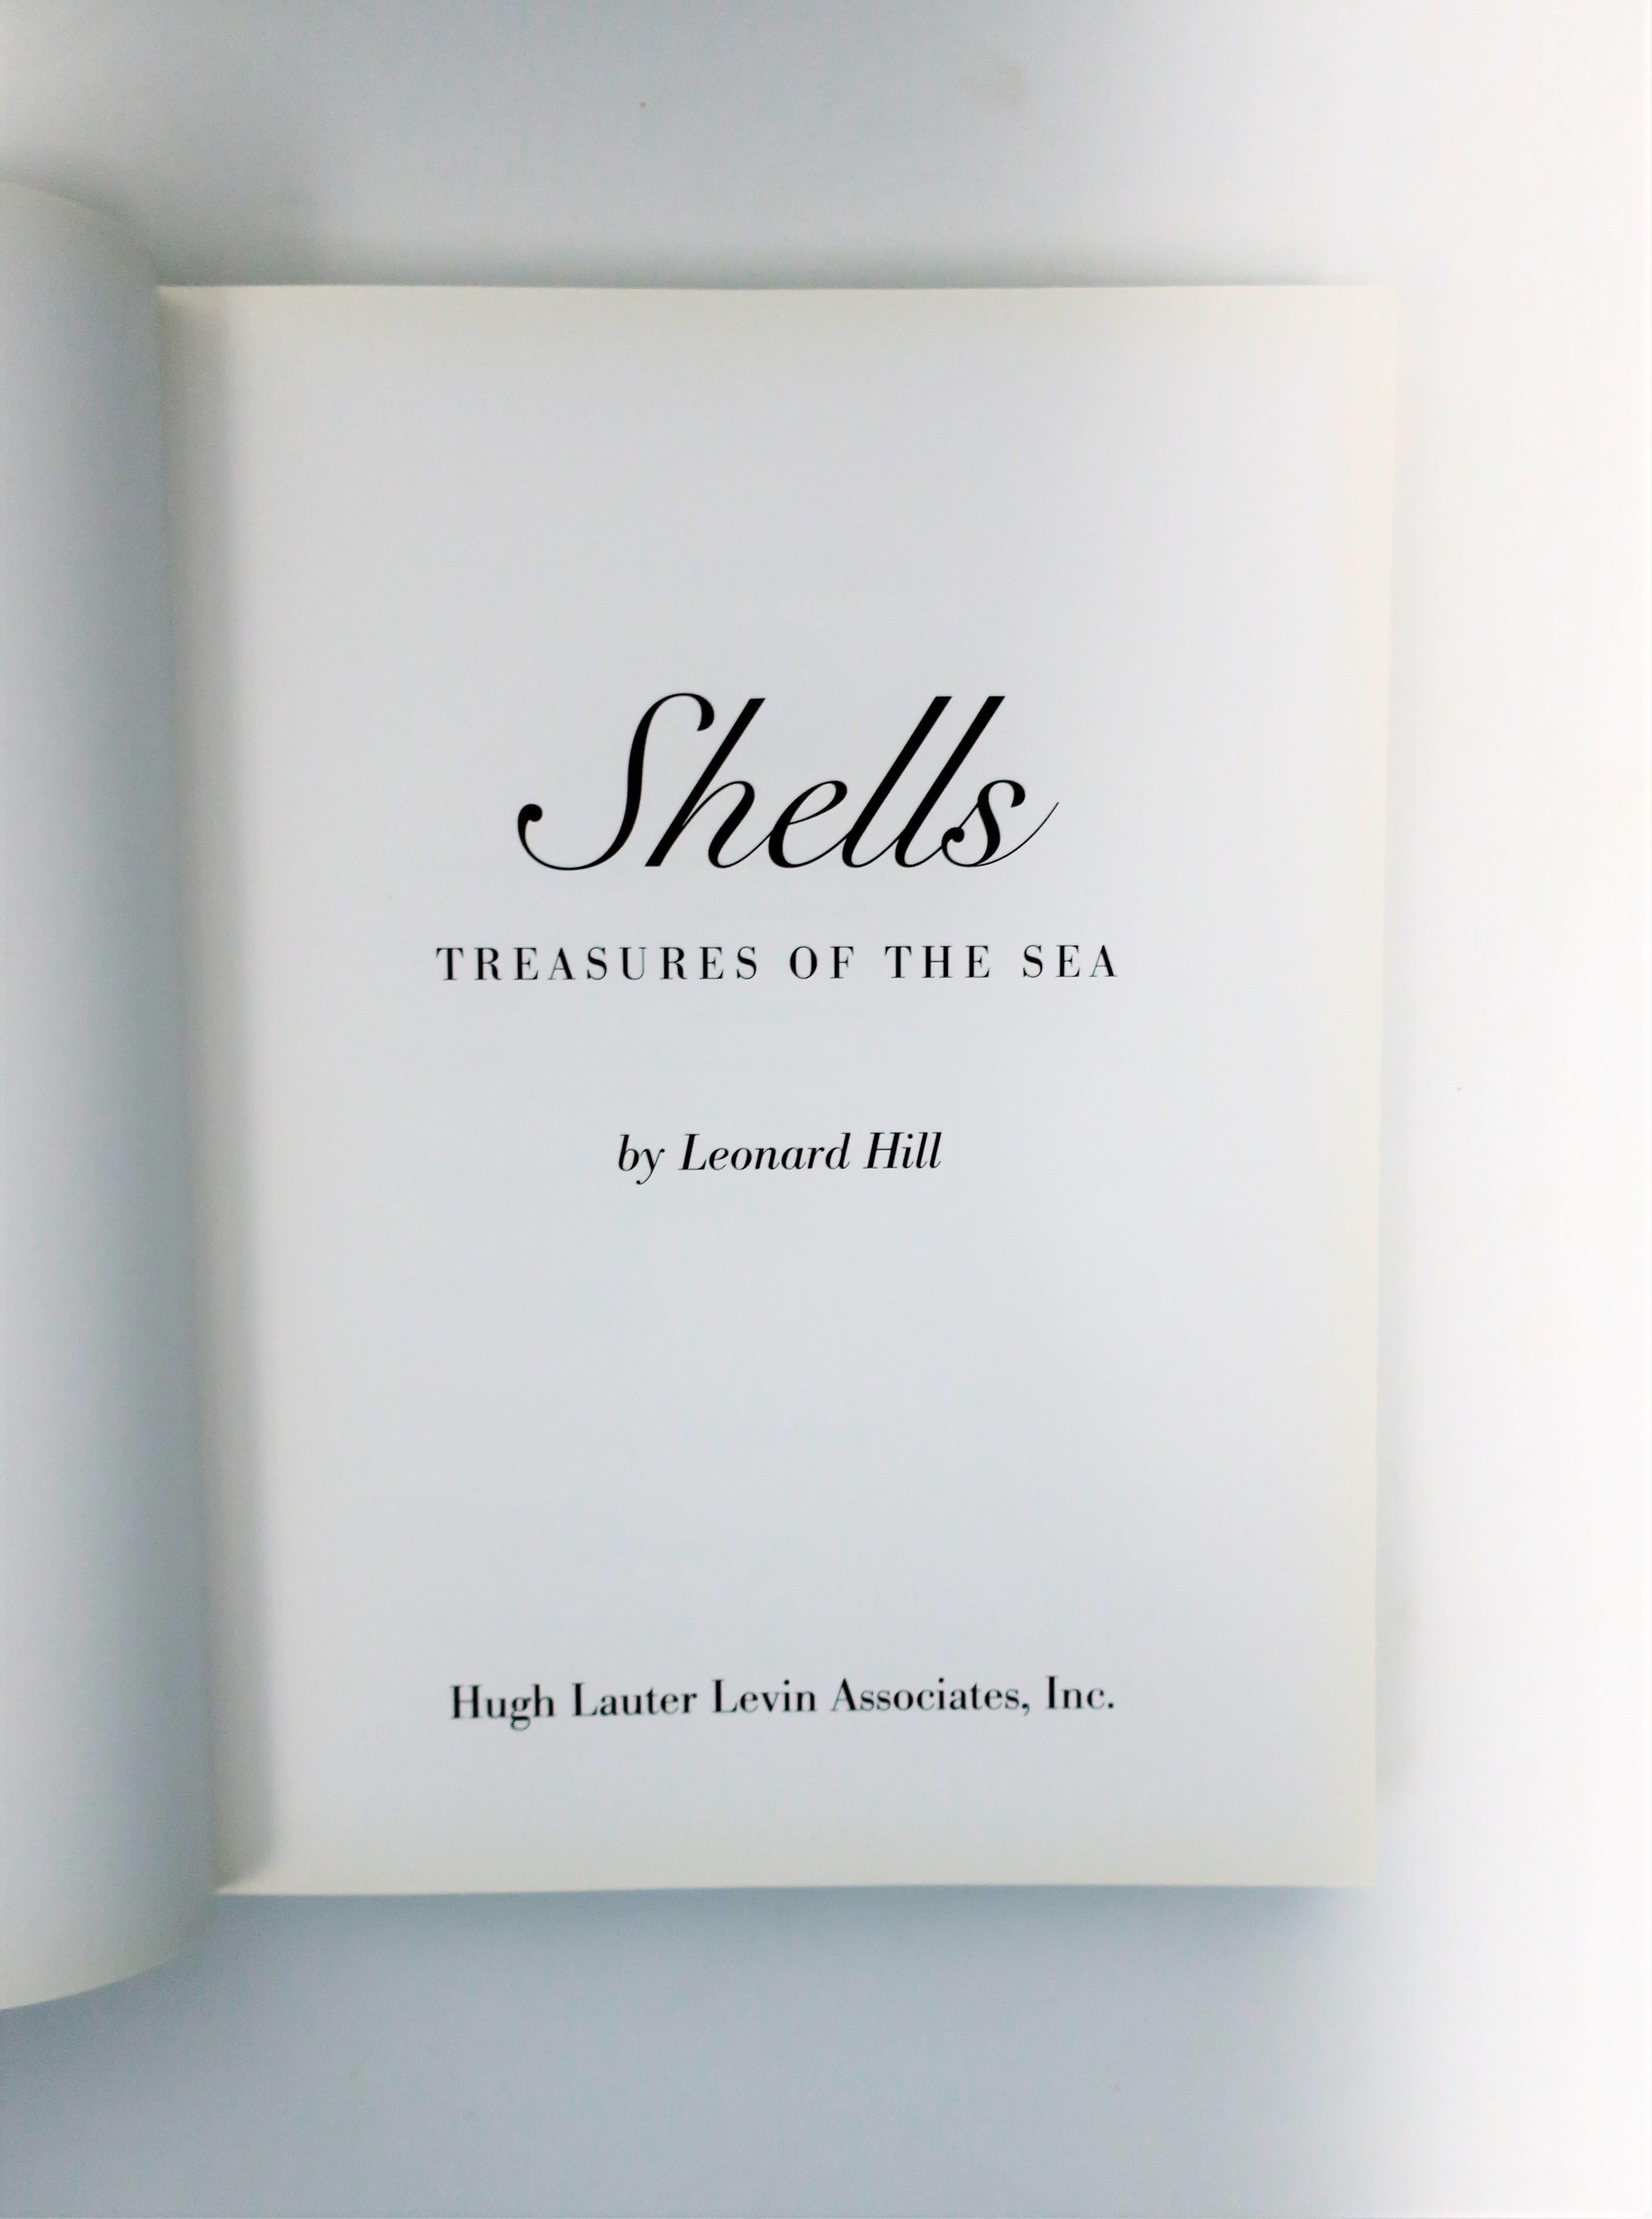 Organic Modern Shells 'Treasures of the Sea' Sea Shell Library or Coffee Table Book, ca. 1990s